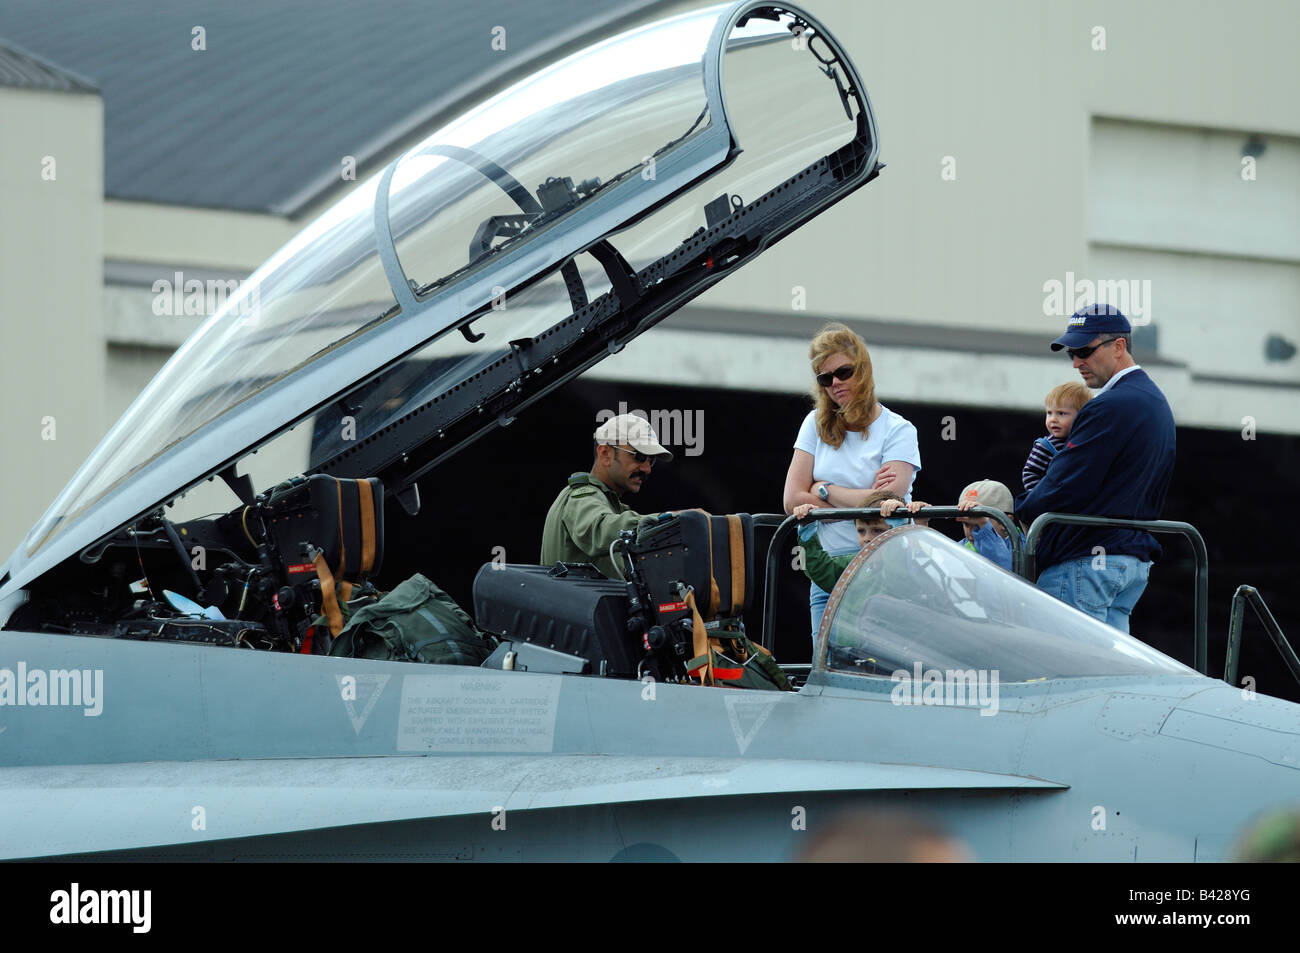 American jet fighter F-18 Hornet cockpit with pilot and american family, Anchorage air show, Alaska, Usa Stock Photo